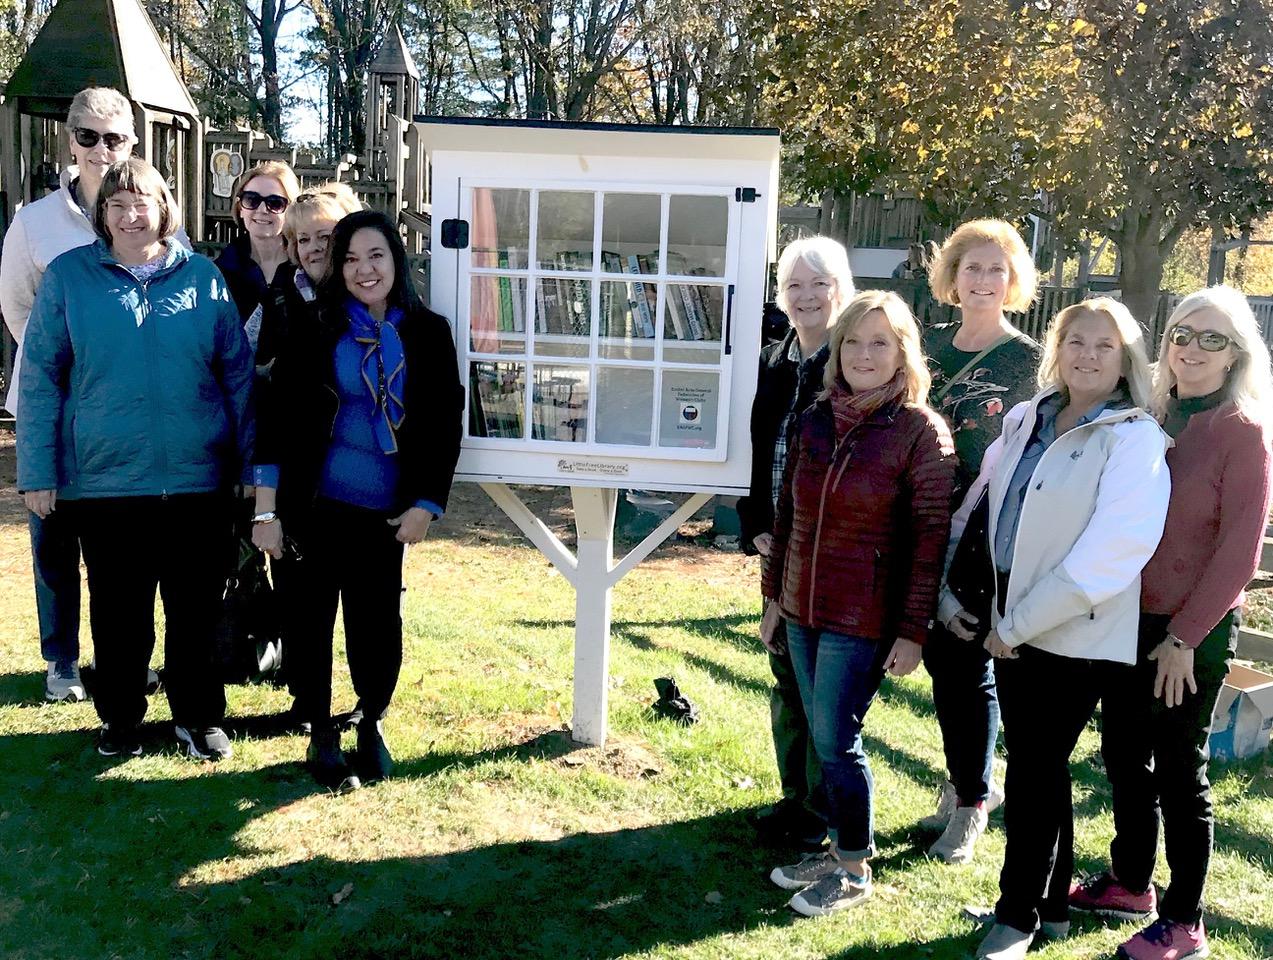 The club dedicated their Little Free Library (LFL) 11/2021 in Exeter at the Healy Recreation Pool.